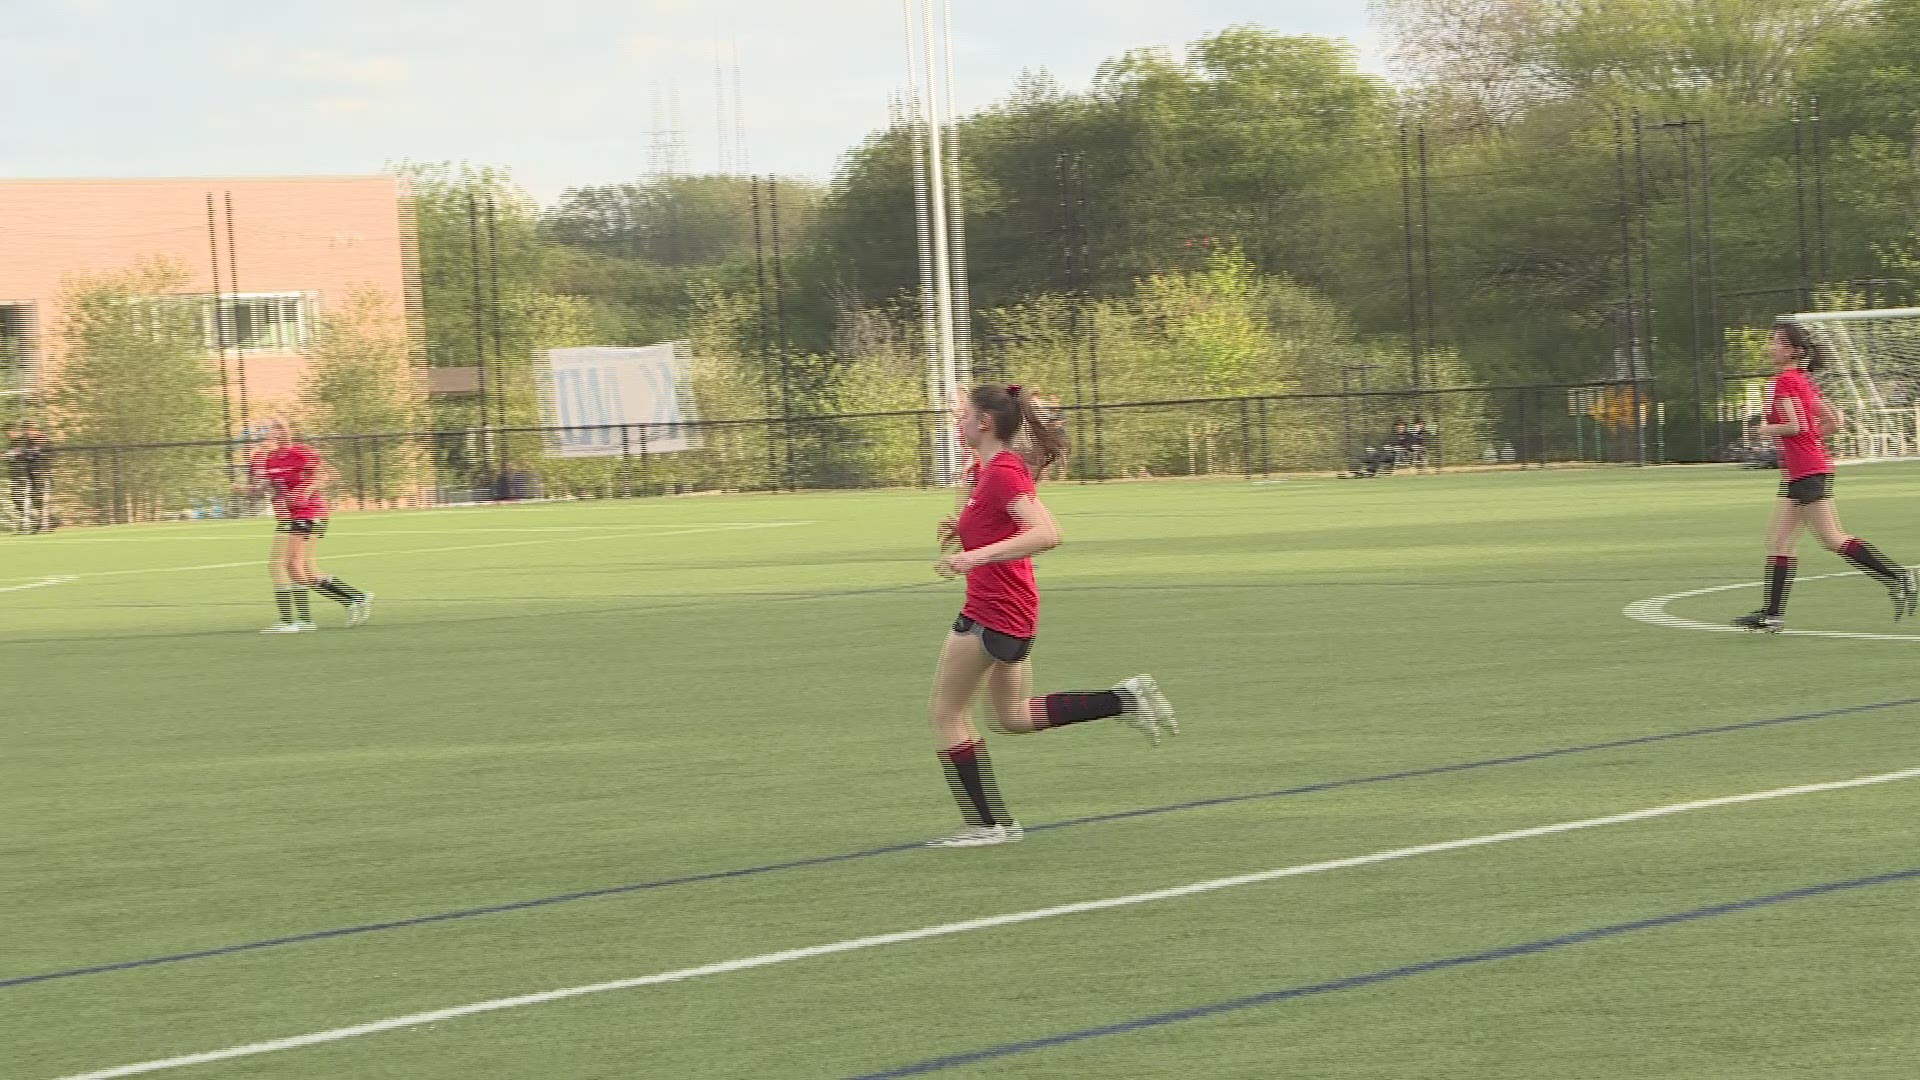 The Arlington Soccer Association said she aged out, but the team said the policy unfairly affects immigrants who have to repeat grades, like Tania.